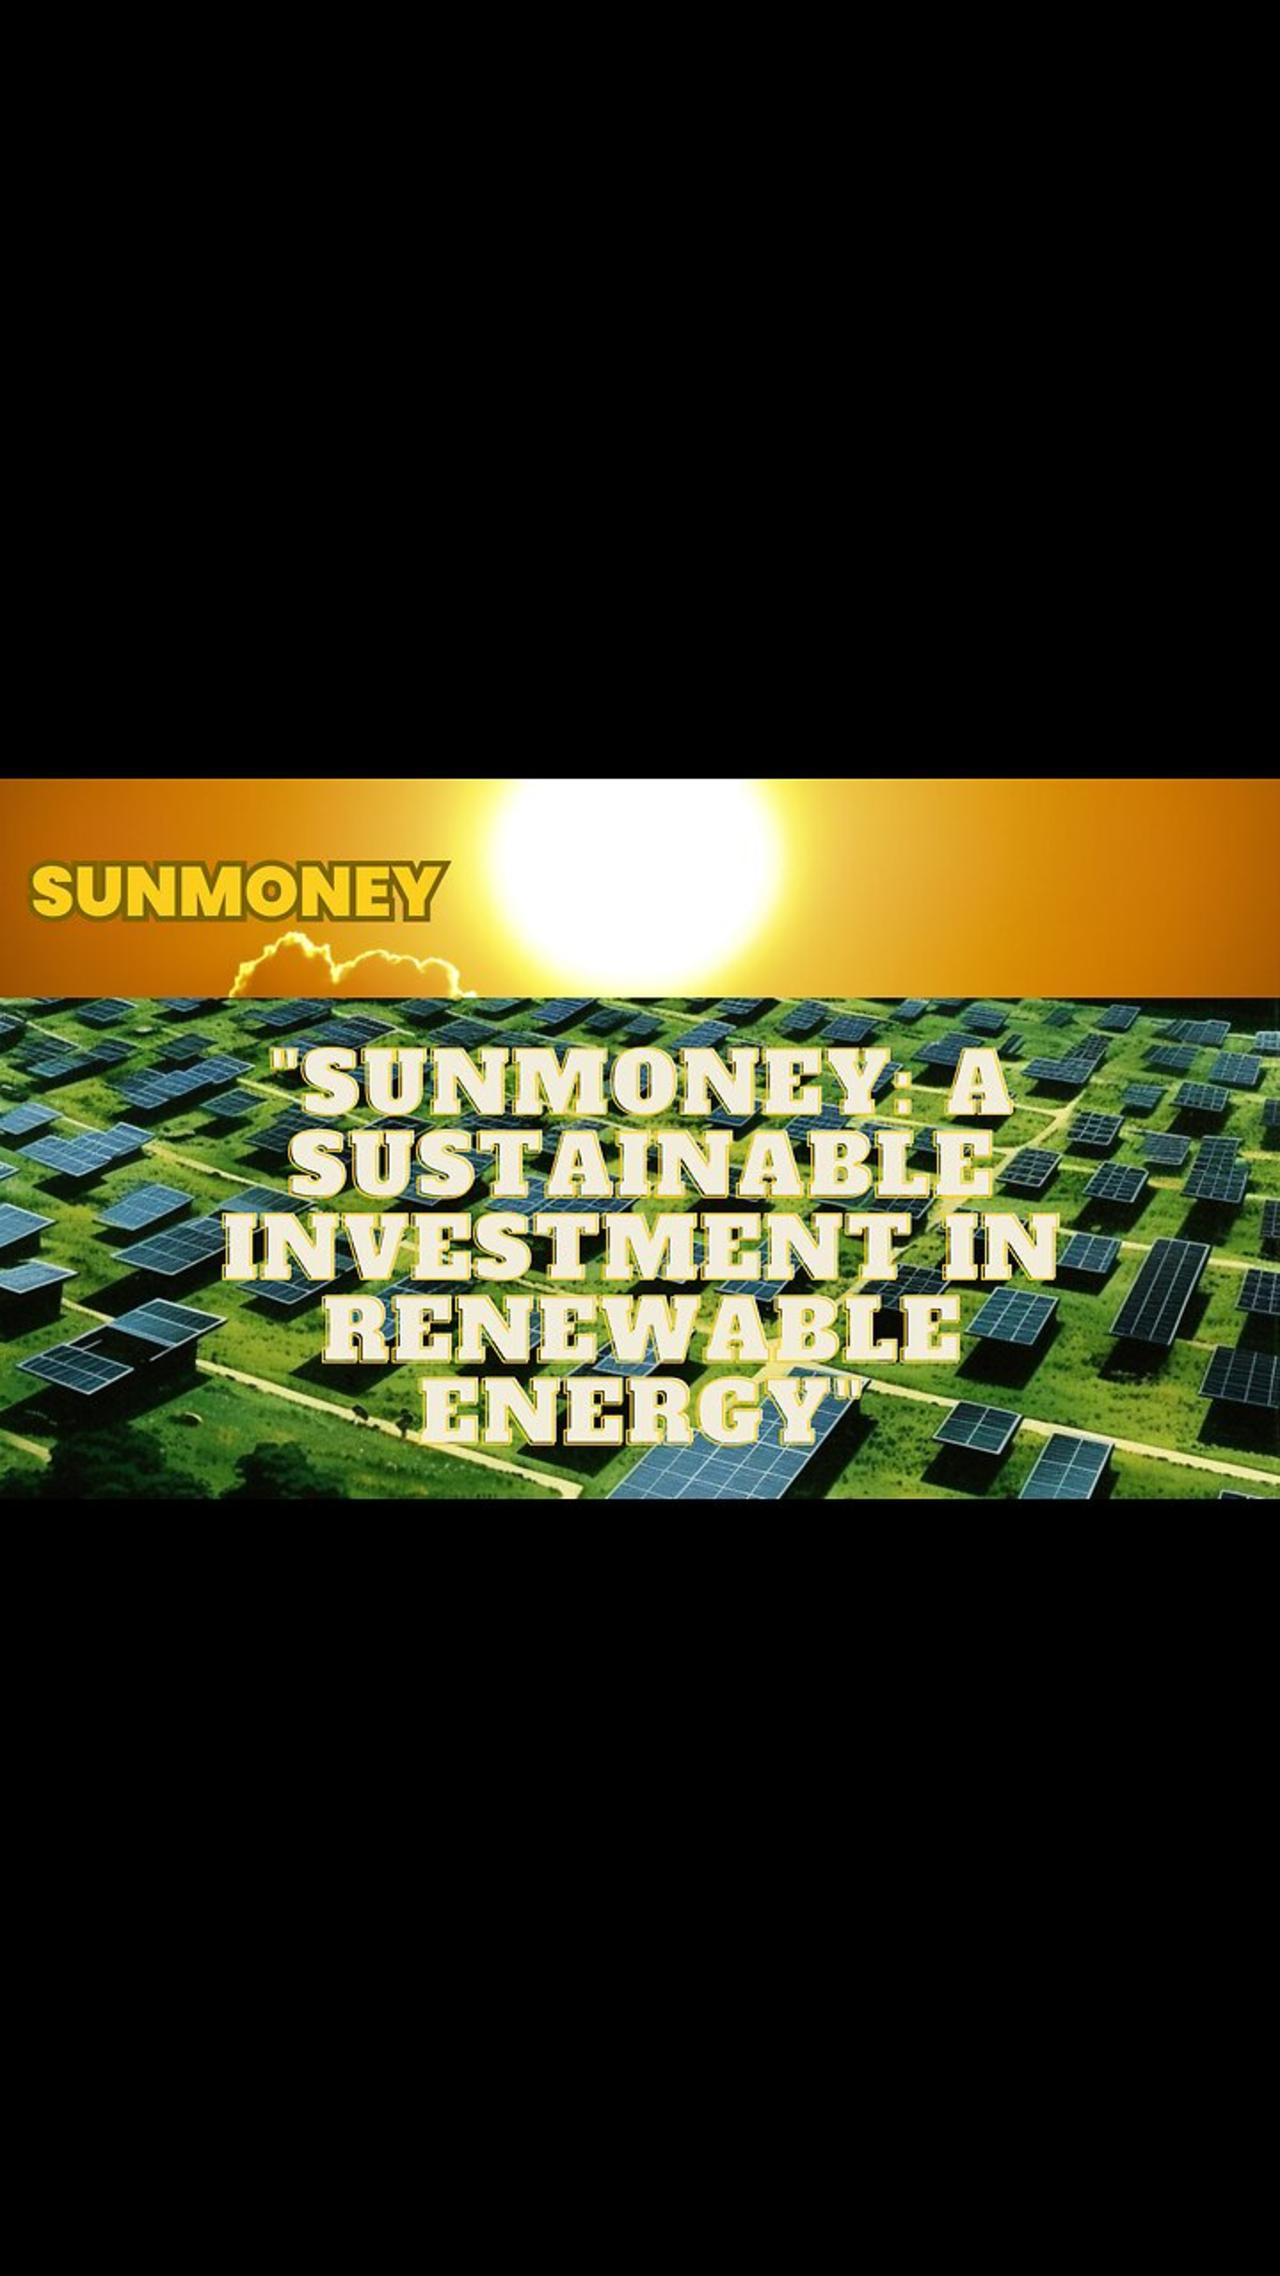 "SunMoney: A Sustainable Investment in Renewable Energy"